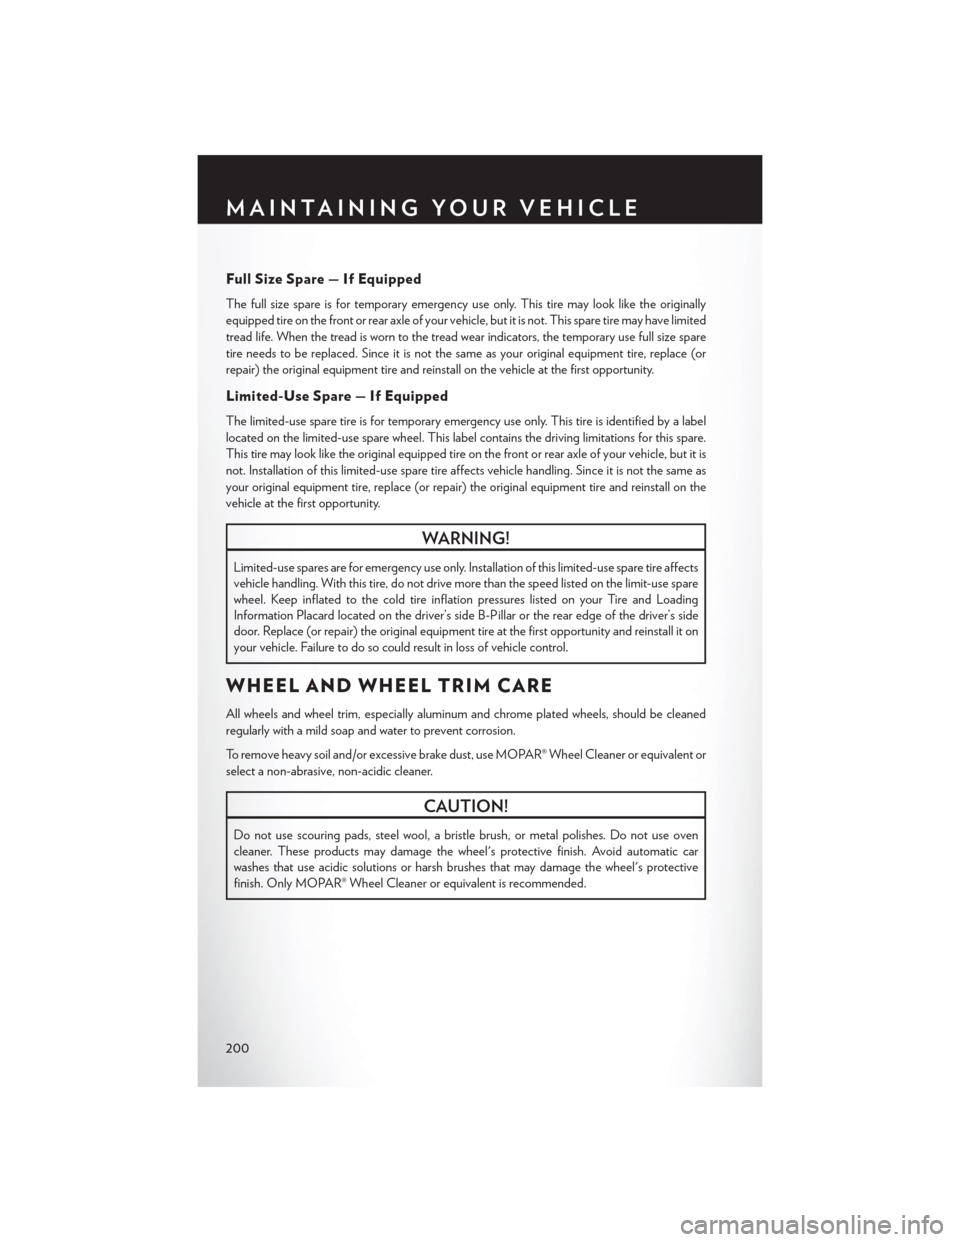 CHRYSLER 200 2015 2.G User Guide Full Size Spare — If Equipped
The full size spare is for temporary emergency use only. This tire may look like the originally
equipped tire on the front or rear axle of your vehicle, but it is not. 